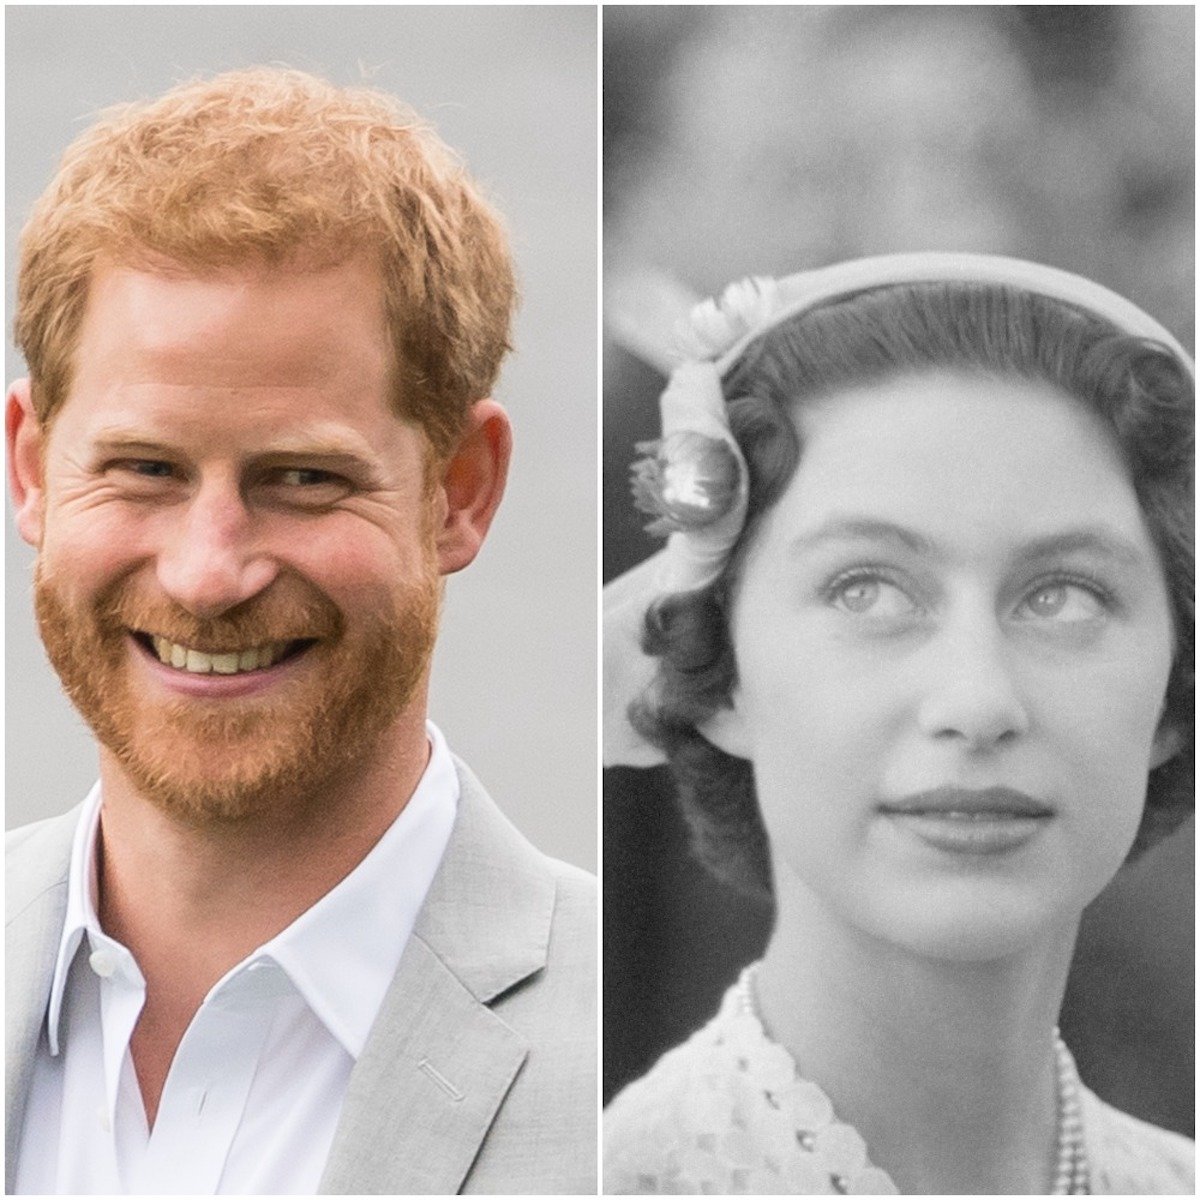 Prince Harry smiling and Prince Margaret looking into the camera